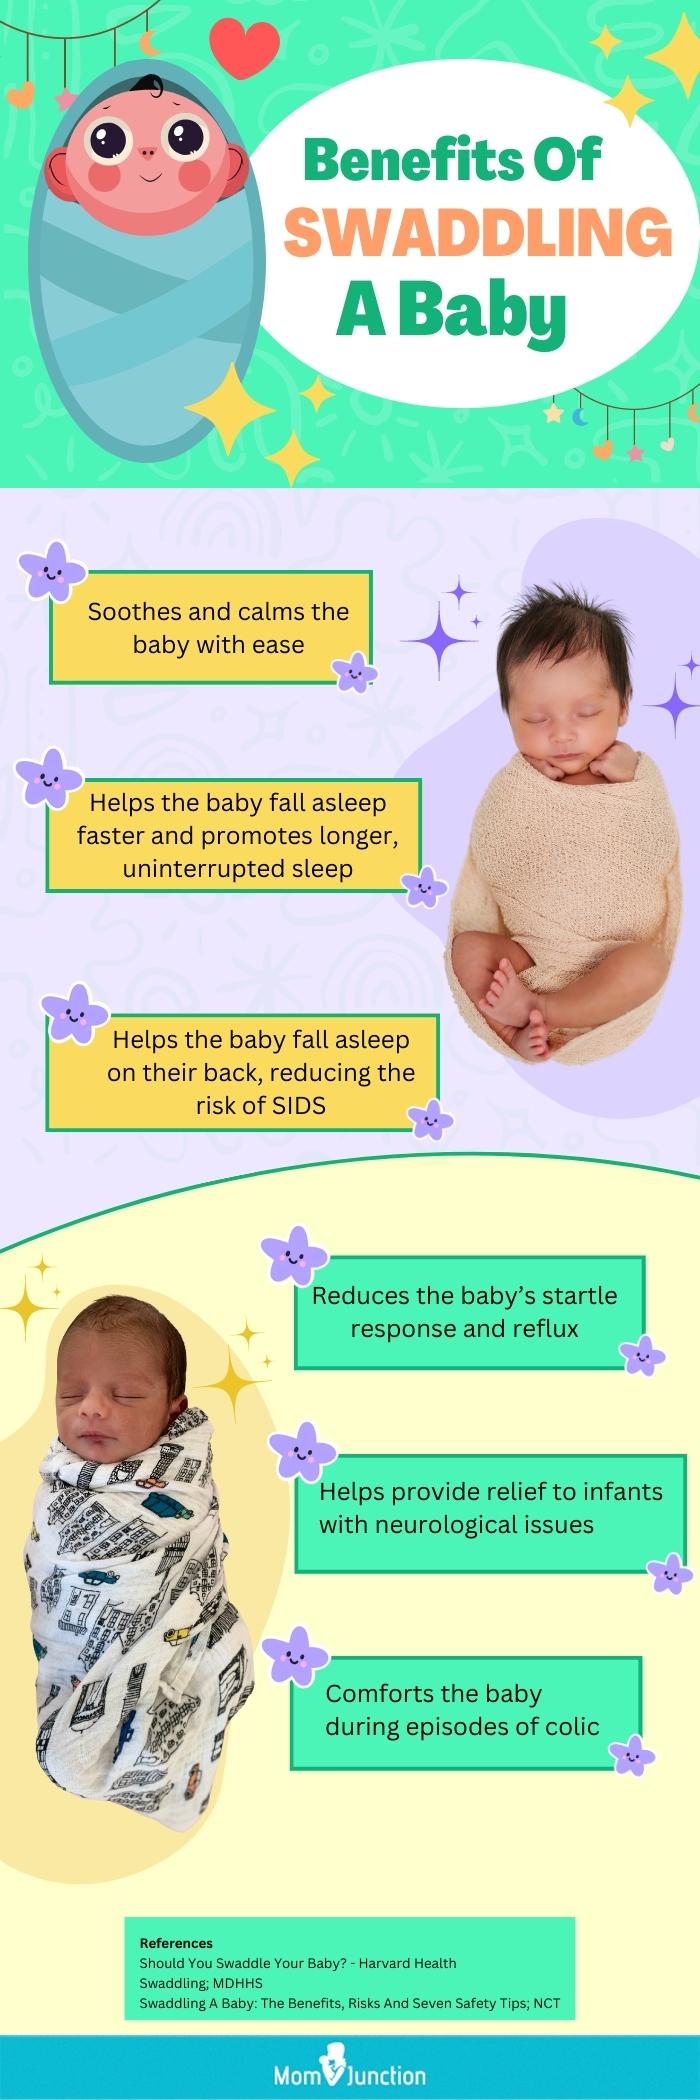 Benefits Of Swaddling A Baby (infographic)